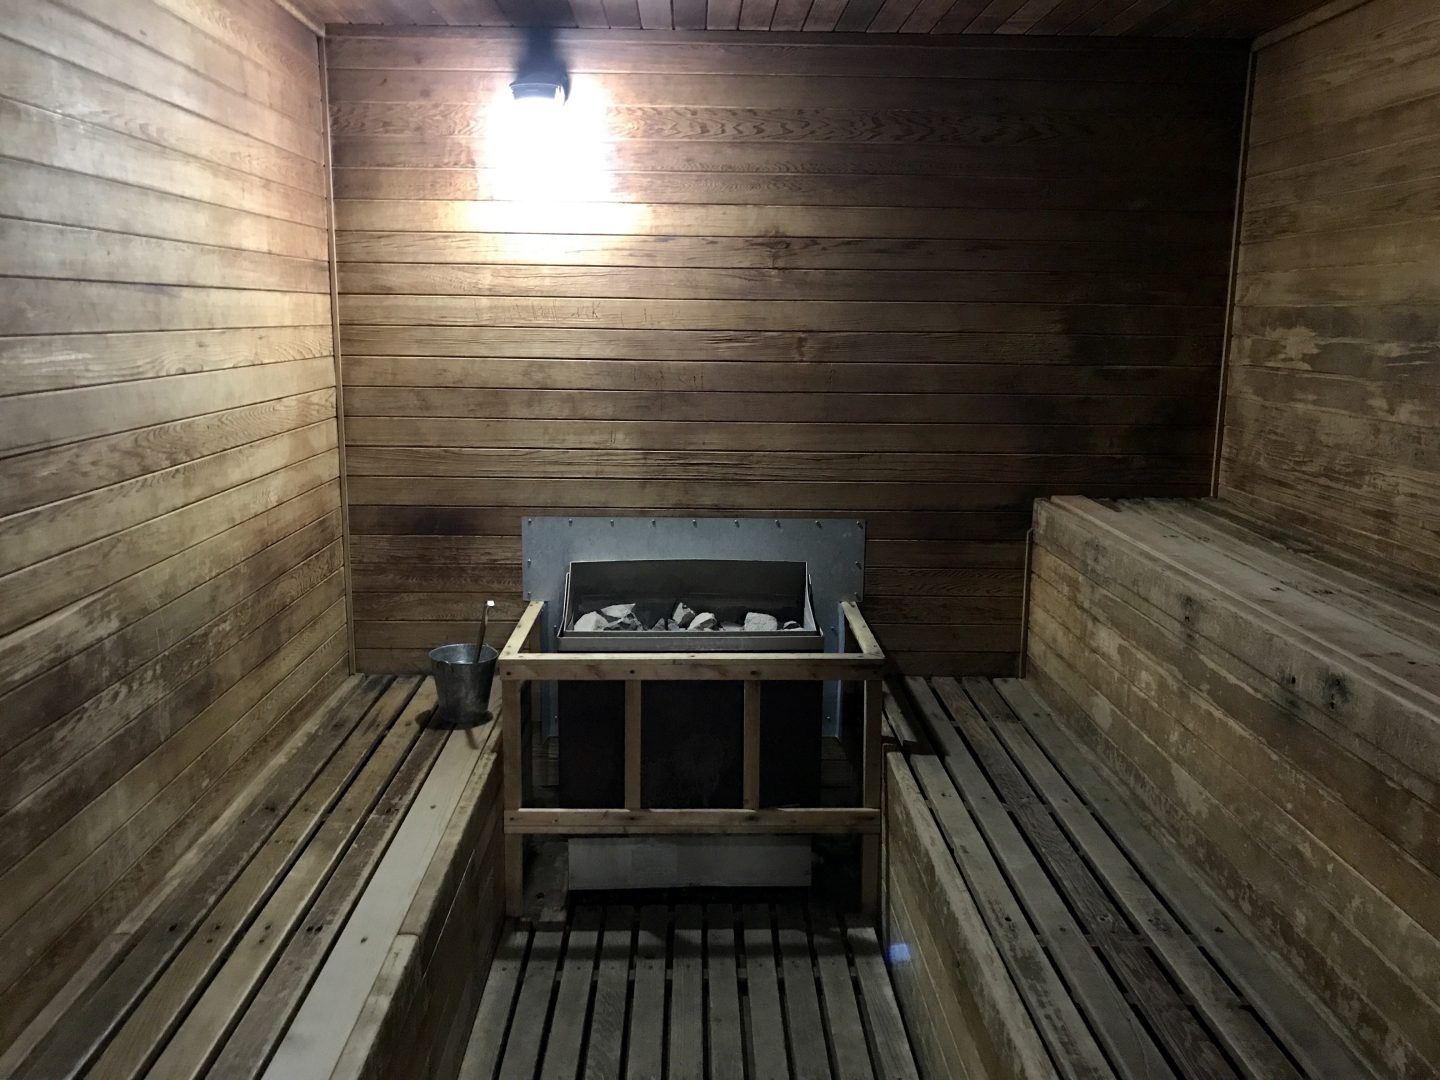 The hot rock sauna is one of the more unique amenities at campgrounds.